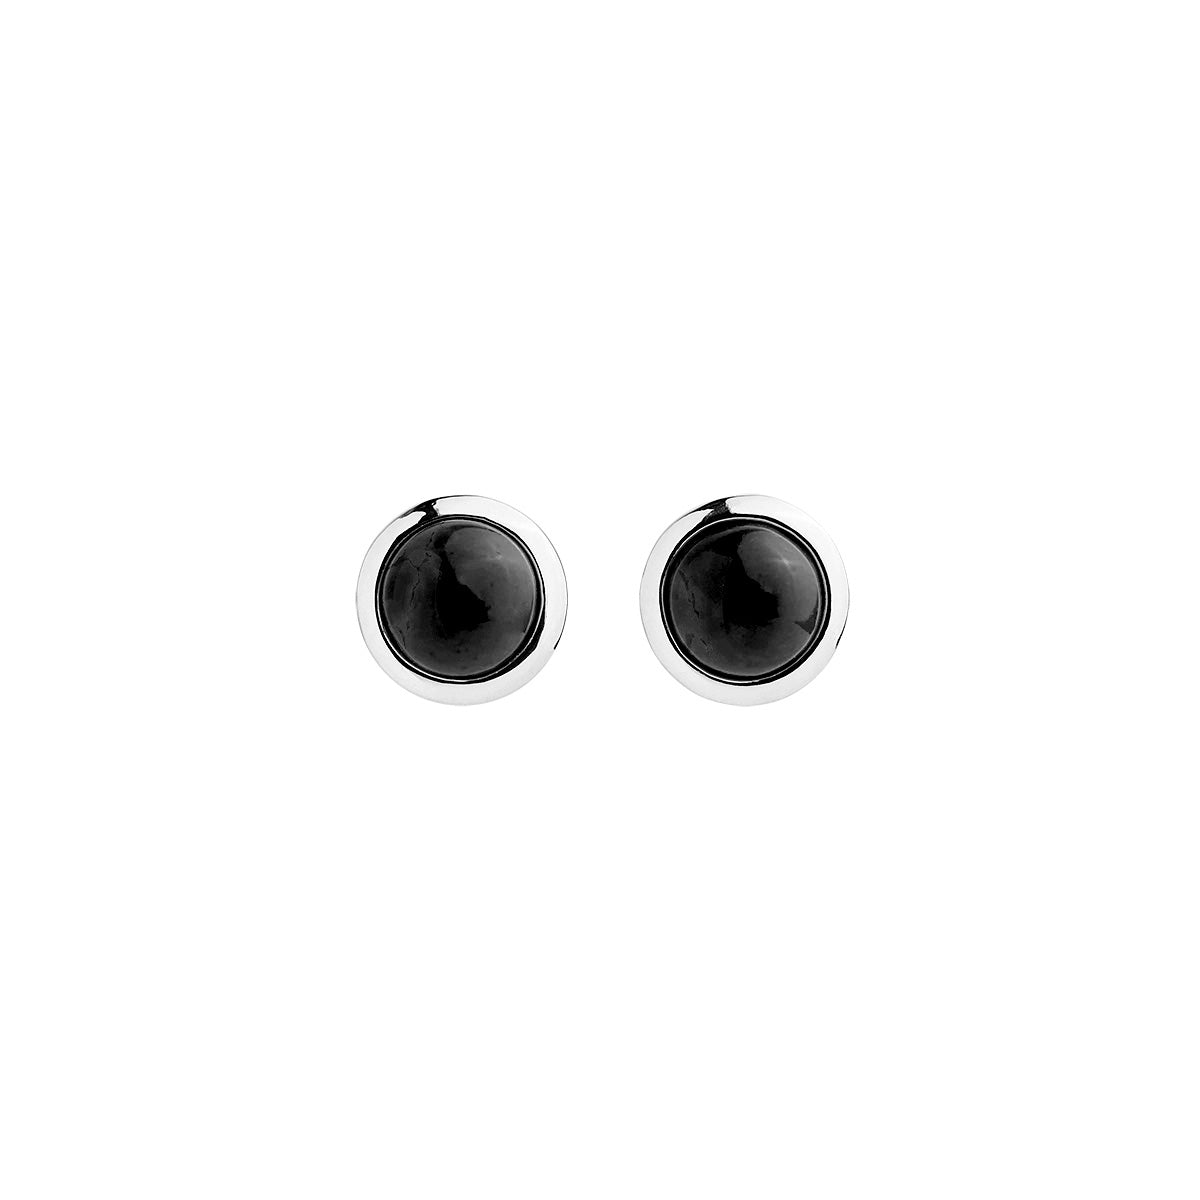 Sterling silver, 8mm round silver and black onyx stud earring